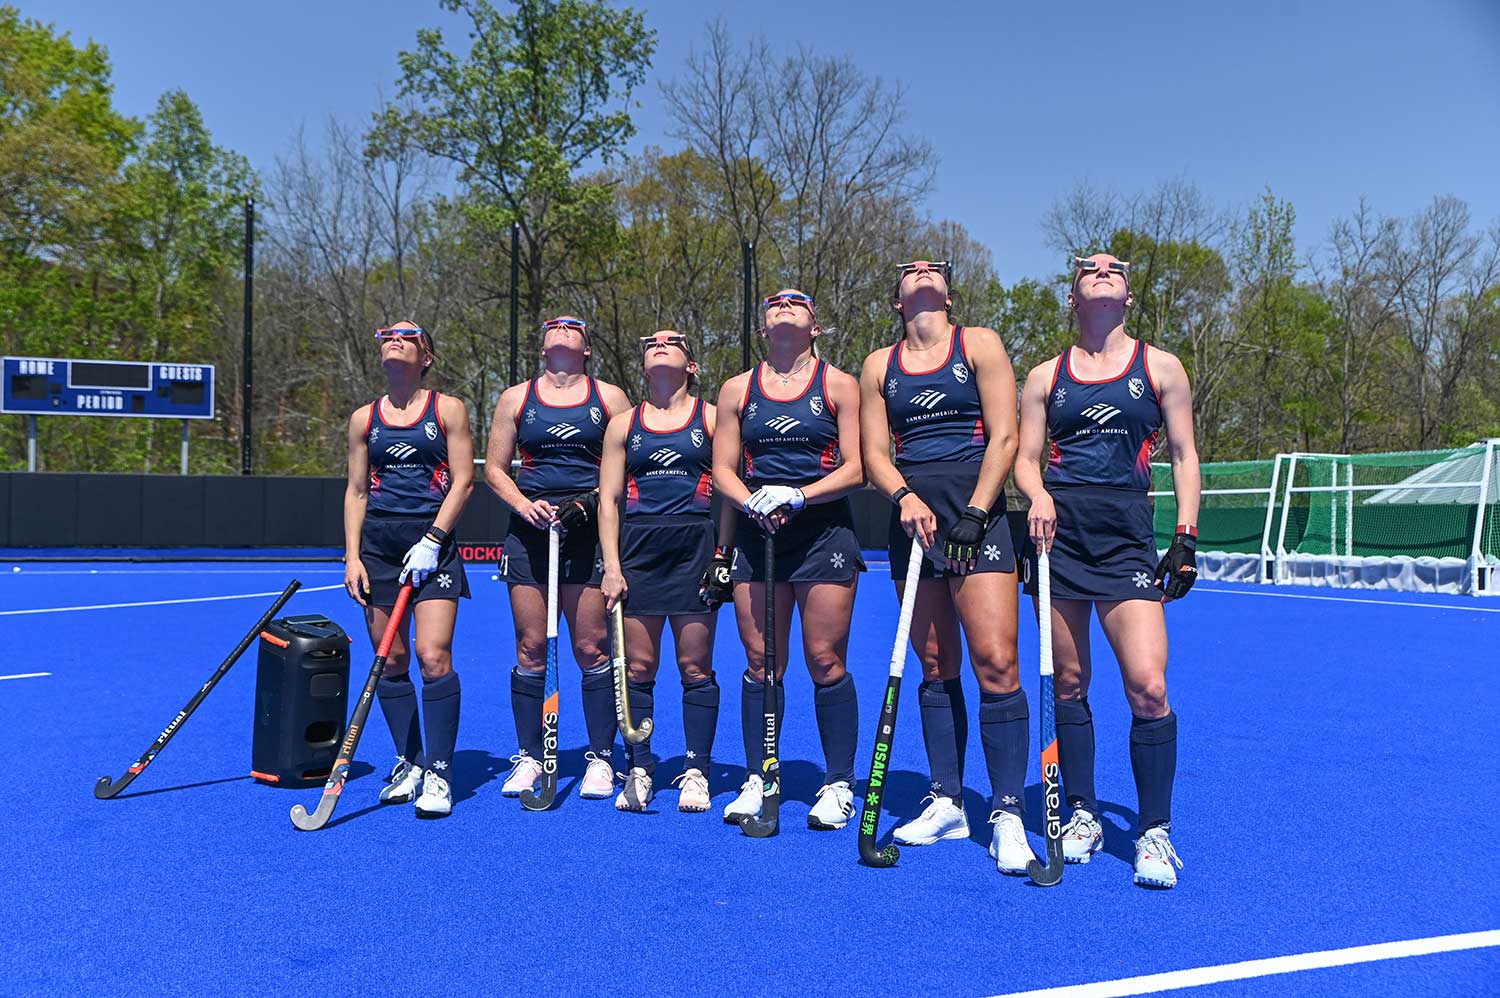 Six field hockey players standing on the field looking up at the sky.